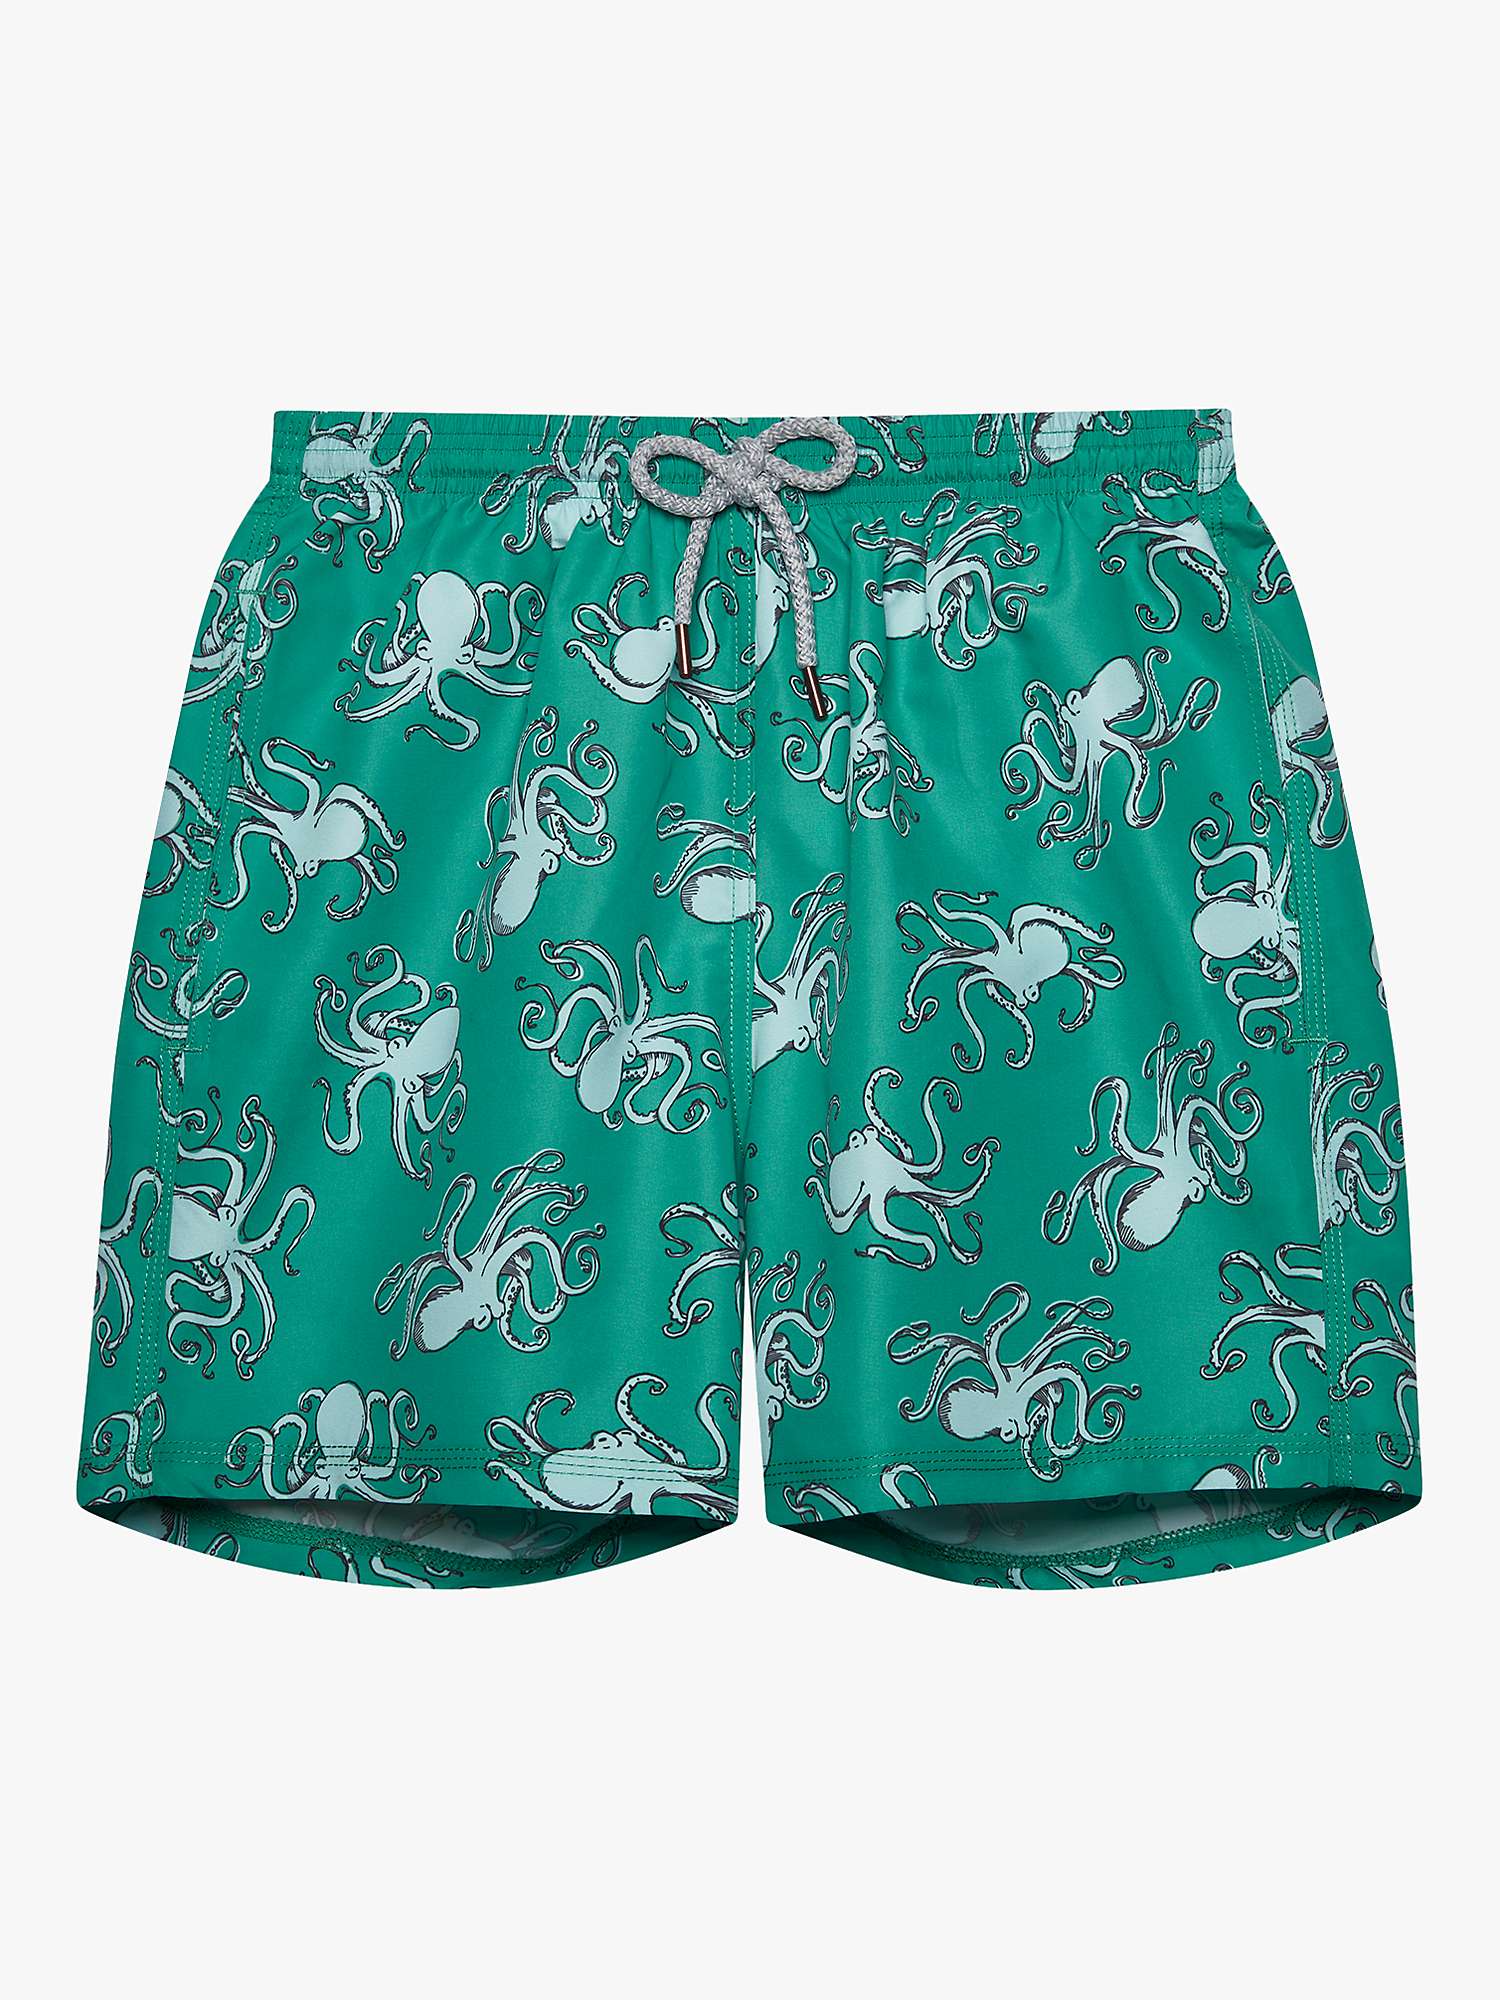 Buy Trotters Octopus Swim Shorts, Green/Octopus Online at johnlewis.com